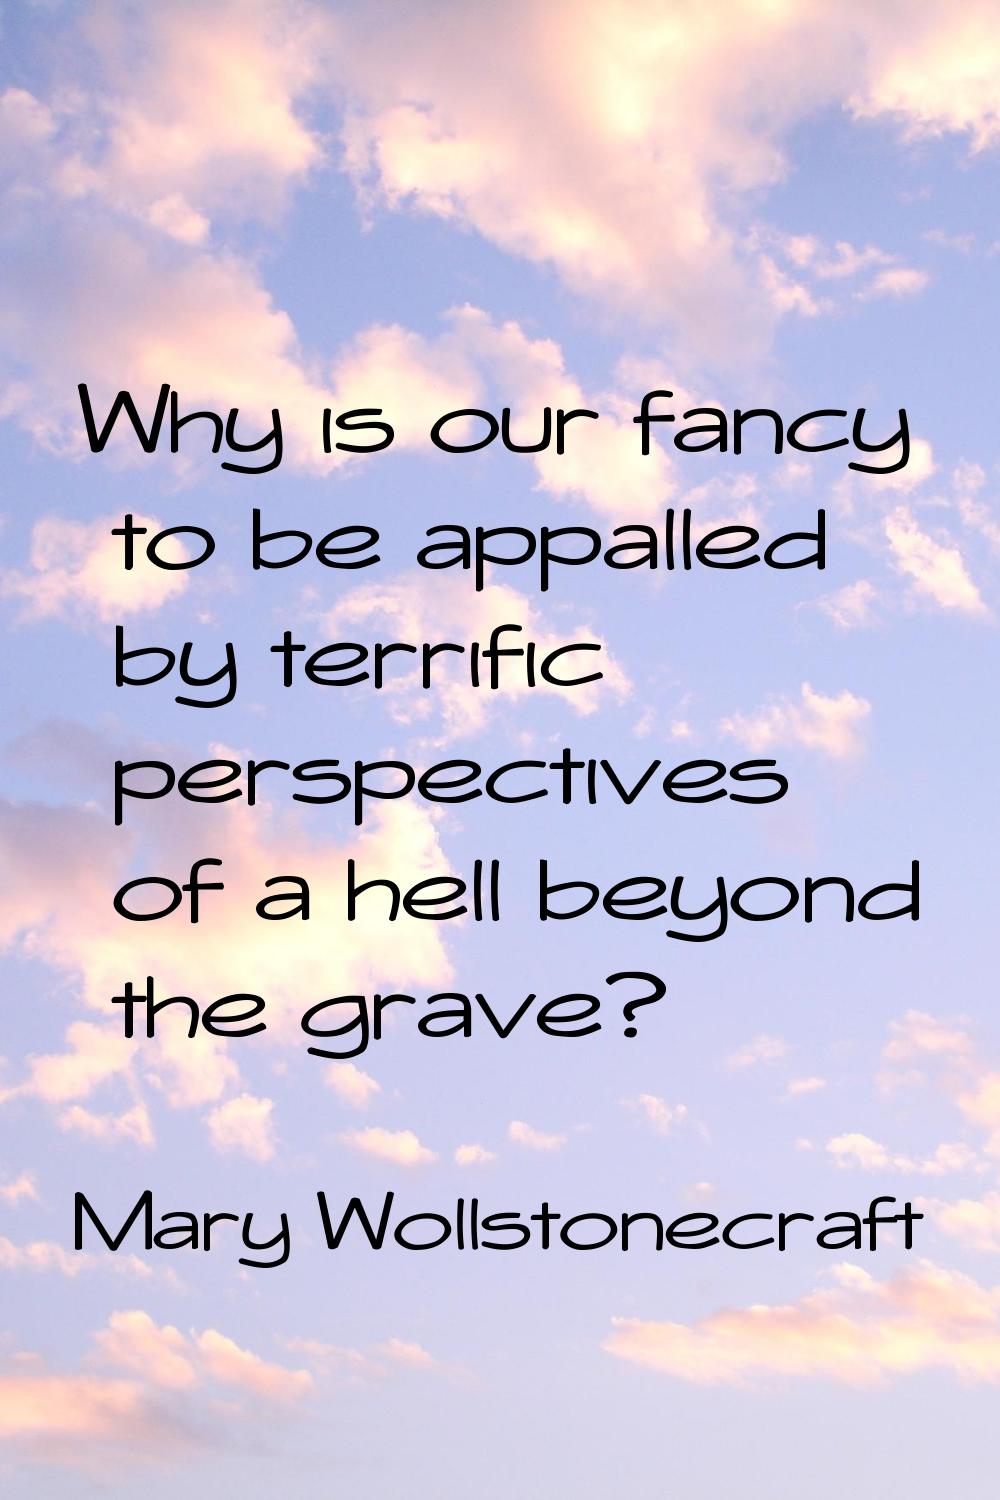 Why is our fancy to be appalled by terrific perspectives of a hell beyond the grave?